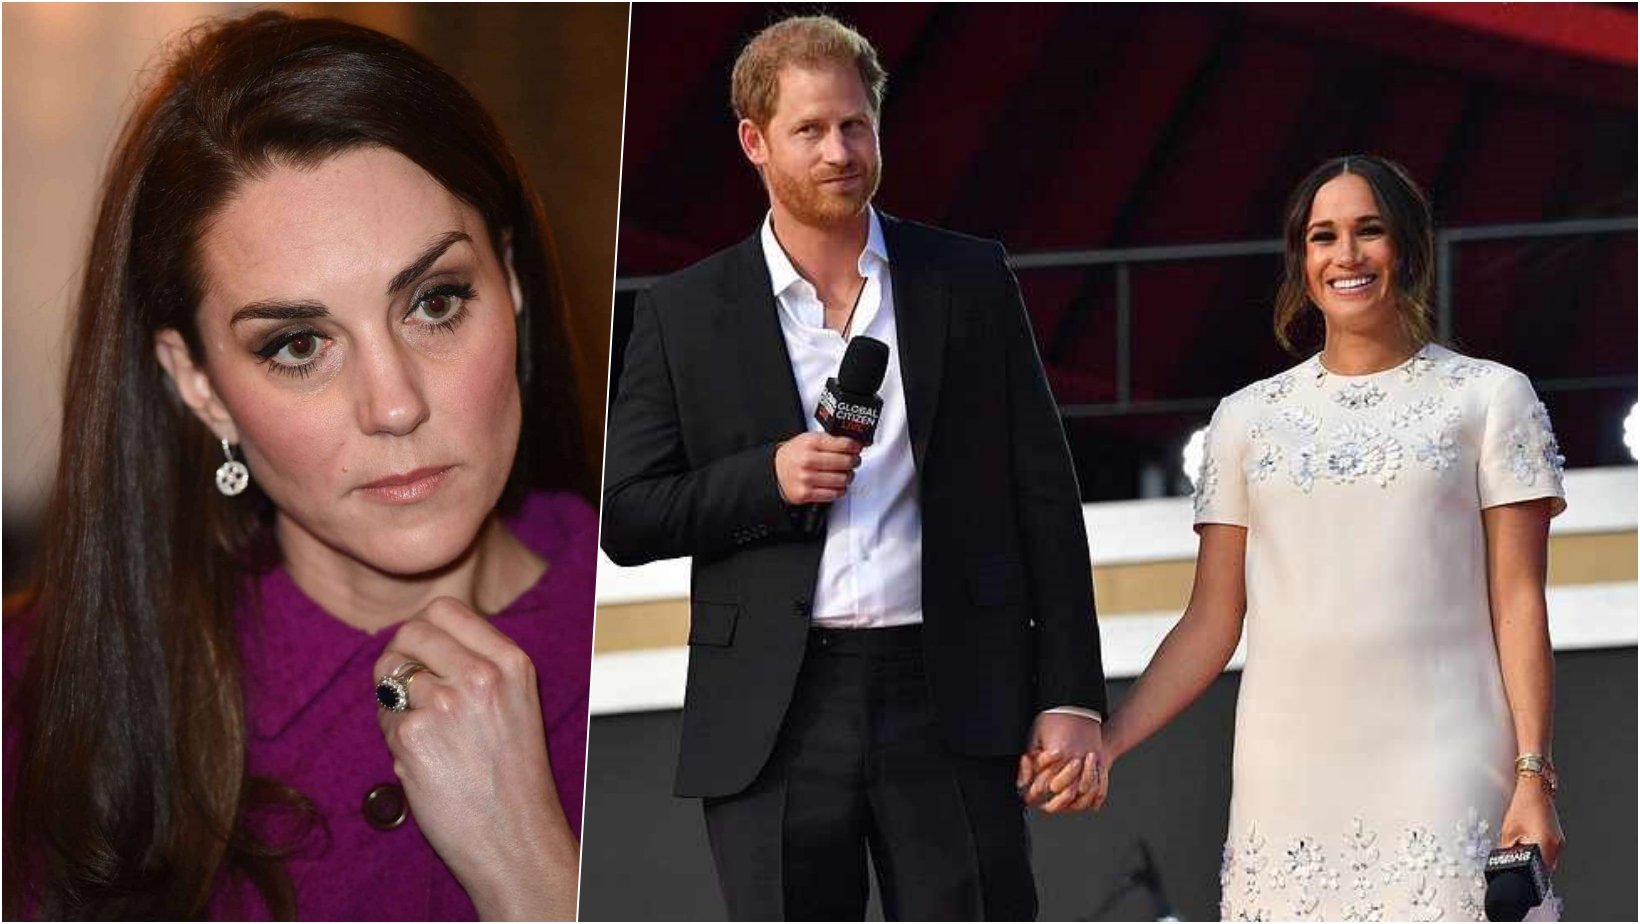 6 facebook cover 4.jpg?resize=1200,630 - Kate Middleton Is “UPSET” Over Dispute Of The Royal Family With Prince Harry And Meghan Markle